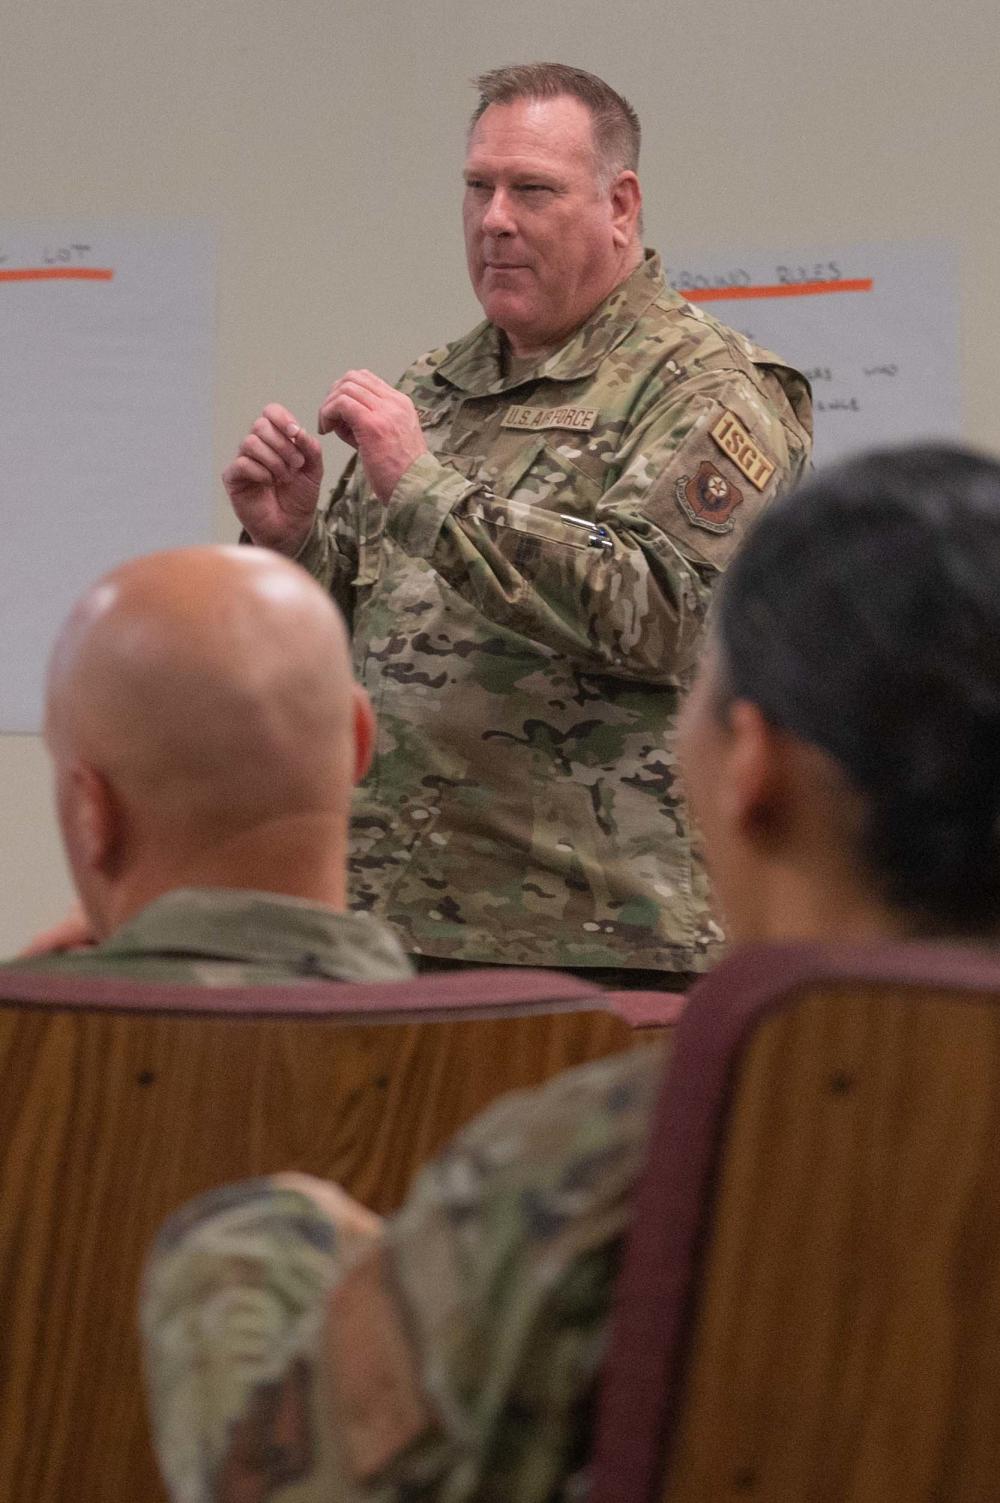 162nd Wing hosts mental health first aid training course for Tucson Air Guardsmen